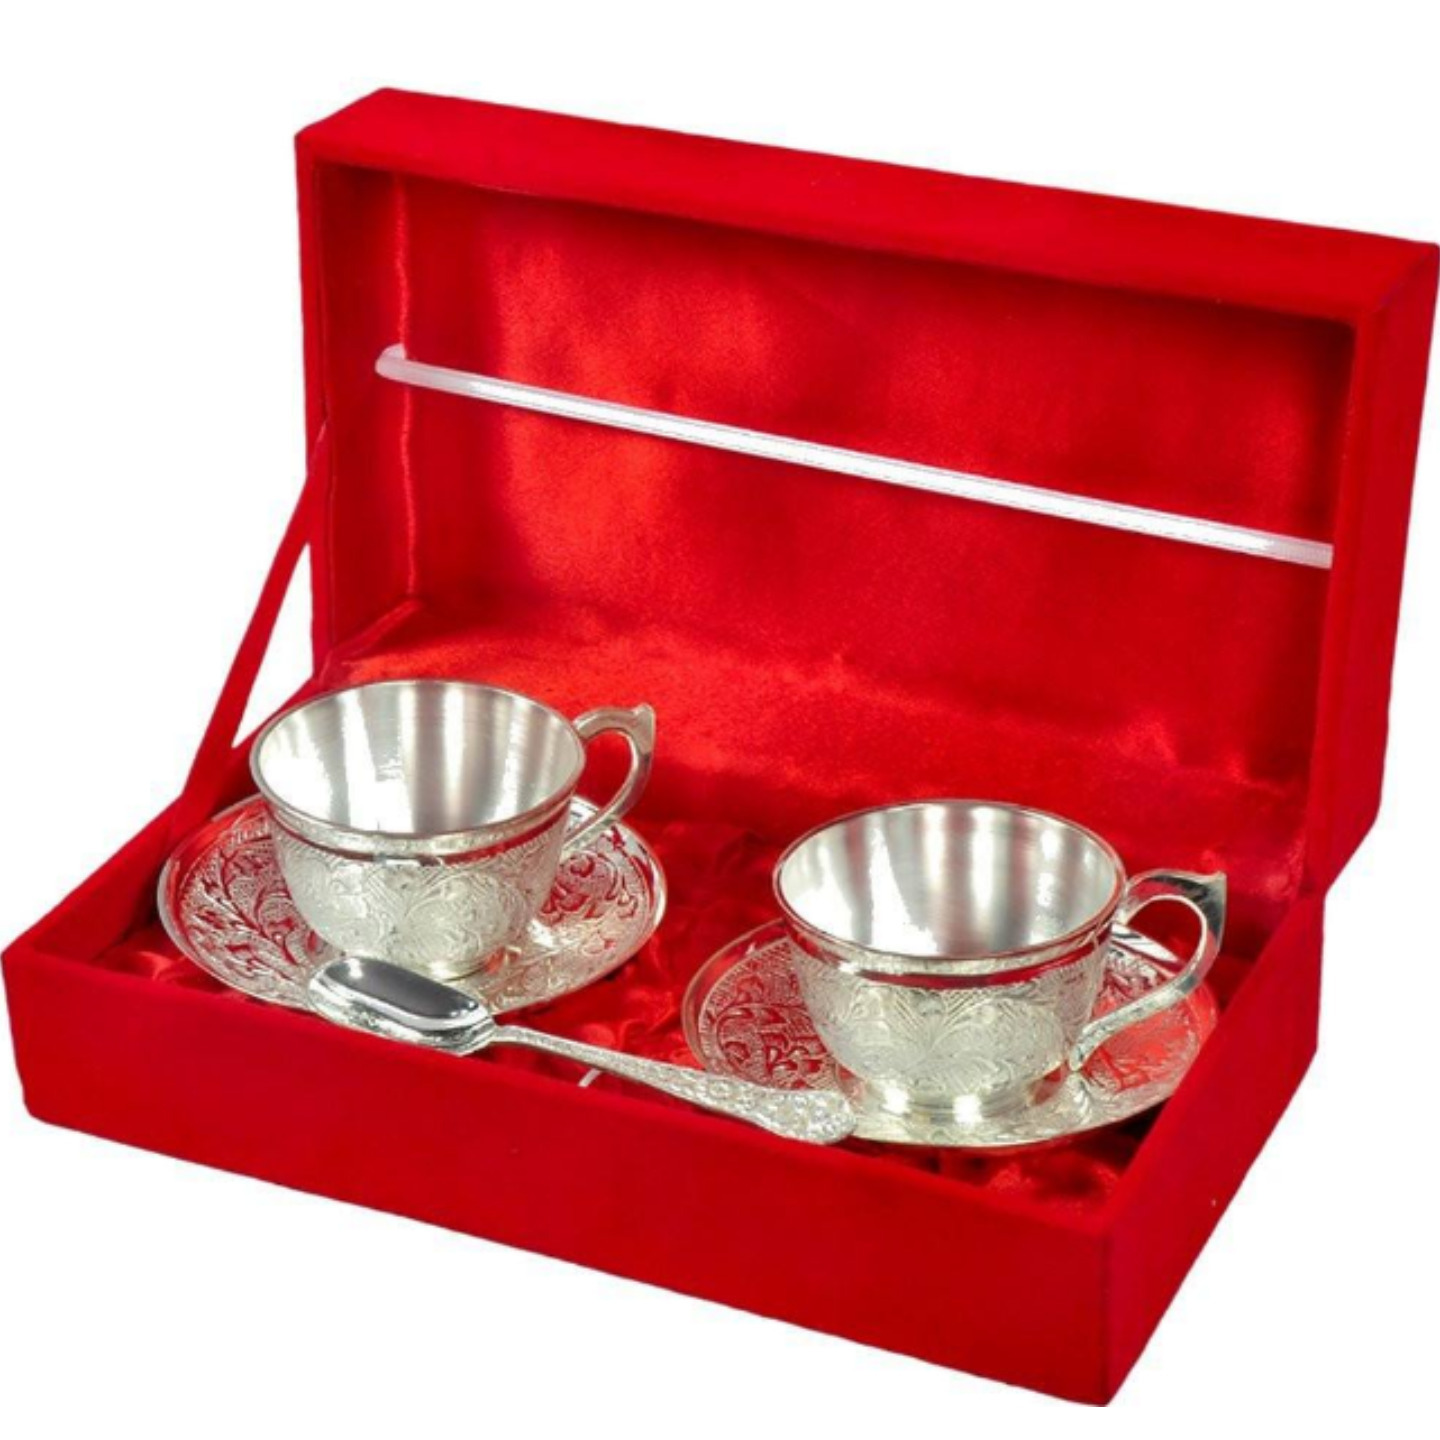 SILVER PLATED 2 CUP SAUCER AND SPOON SET